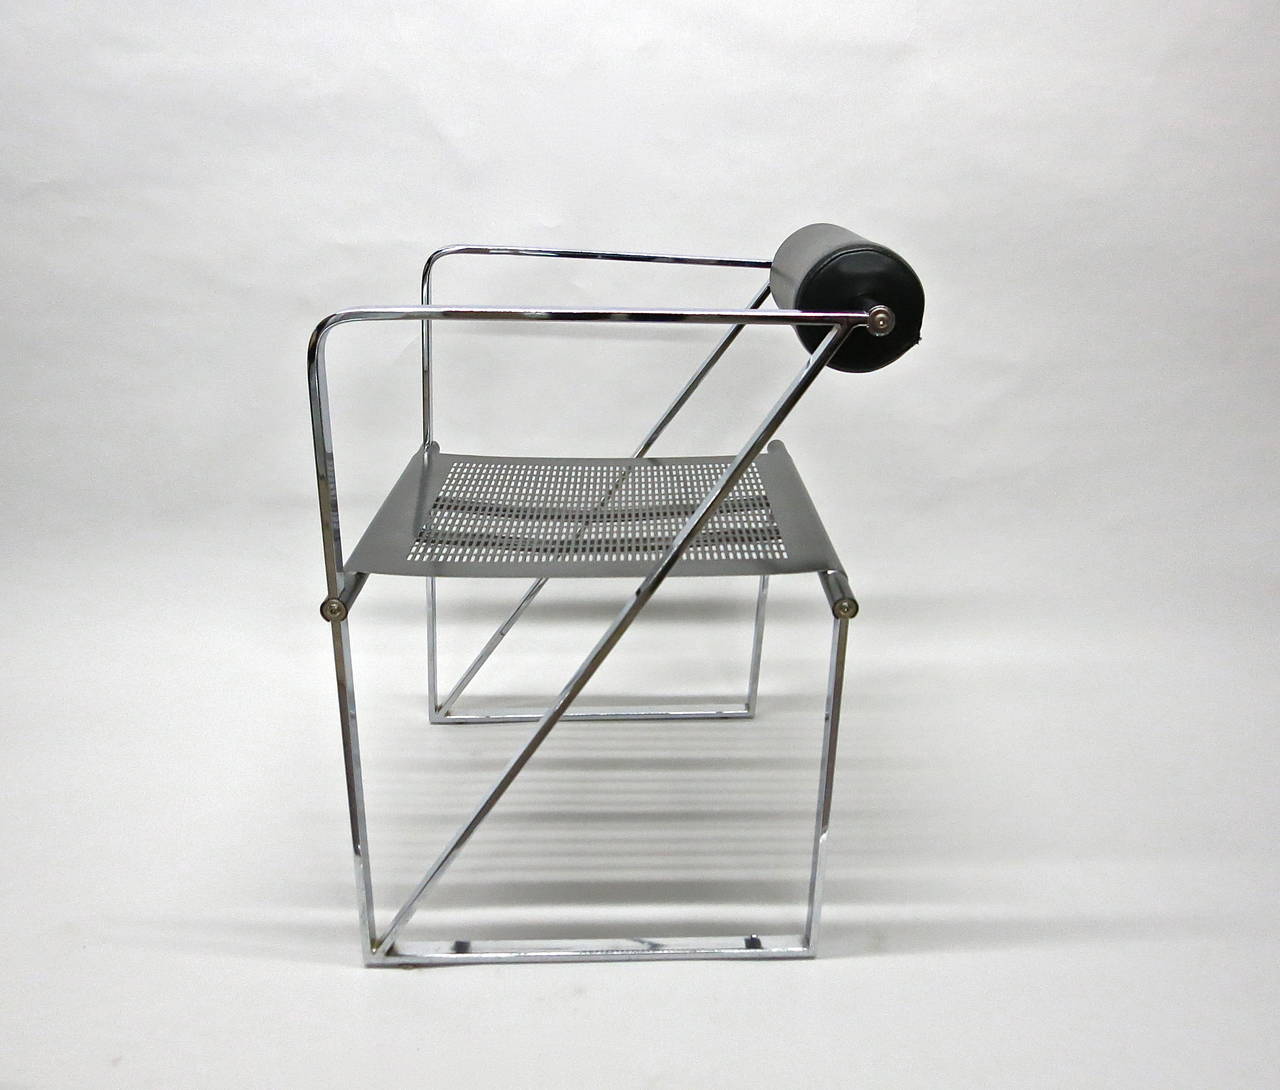 20th Century Pair of Chairs by Mario Botta, Steel and Leather, circa 1980, Made in Italy